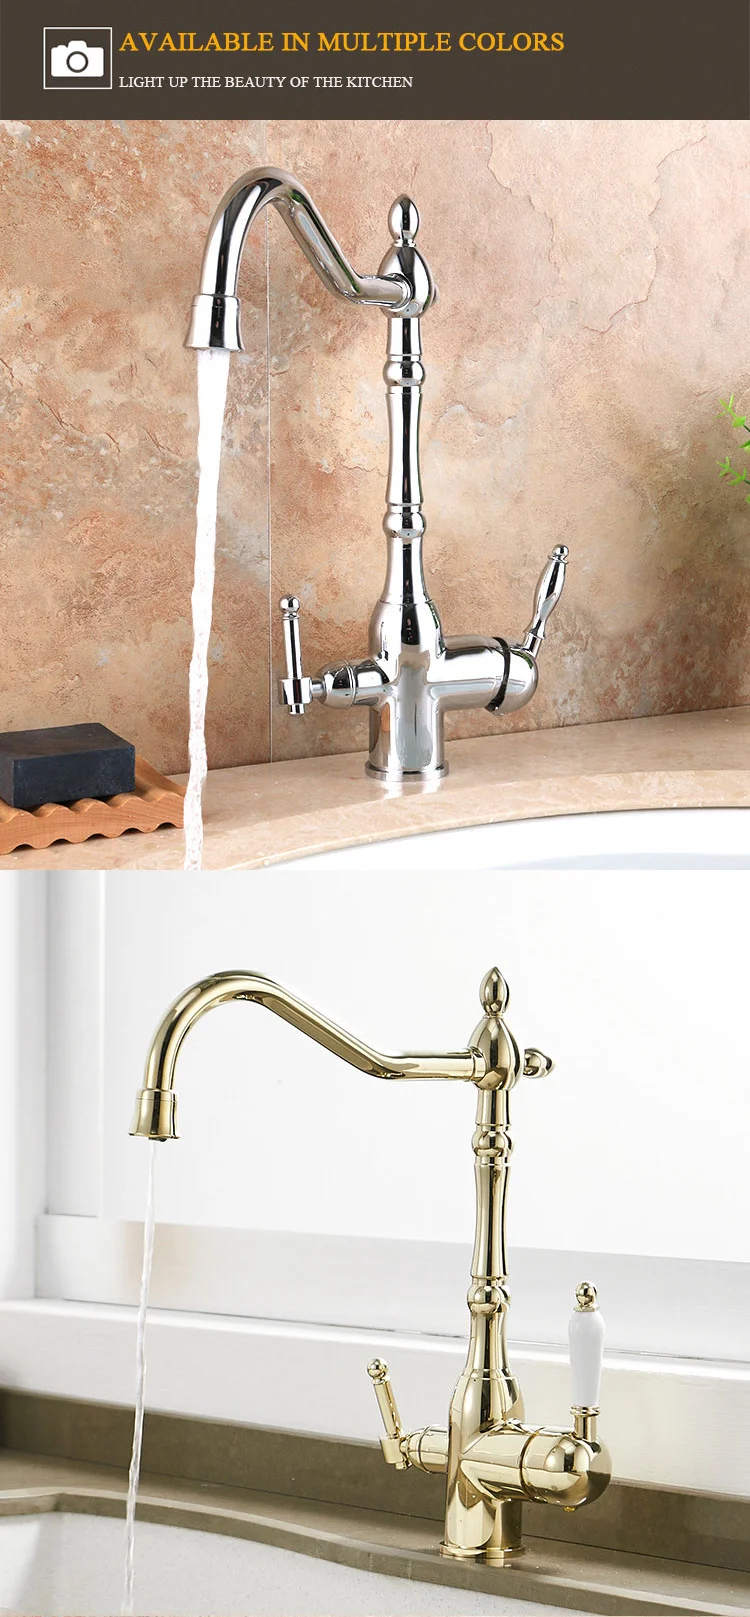 Flat feet double open ceramic handle ISO kitchen faucet